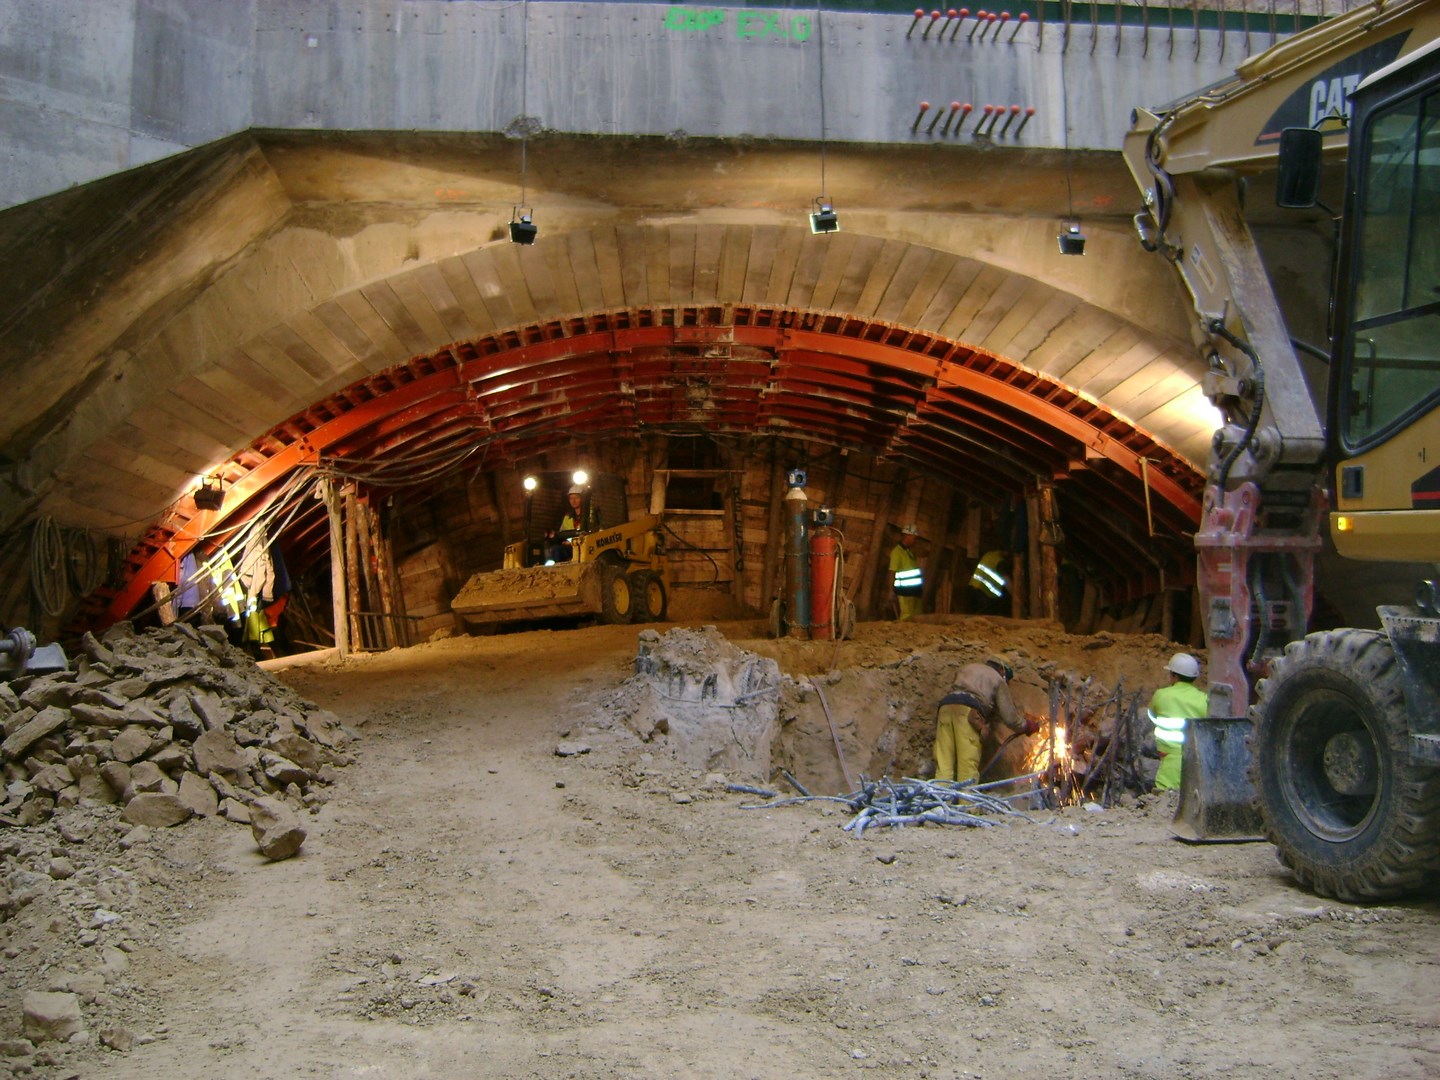 Construction of the AVE tunnel at Chamartin